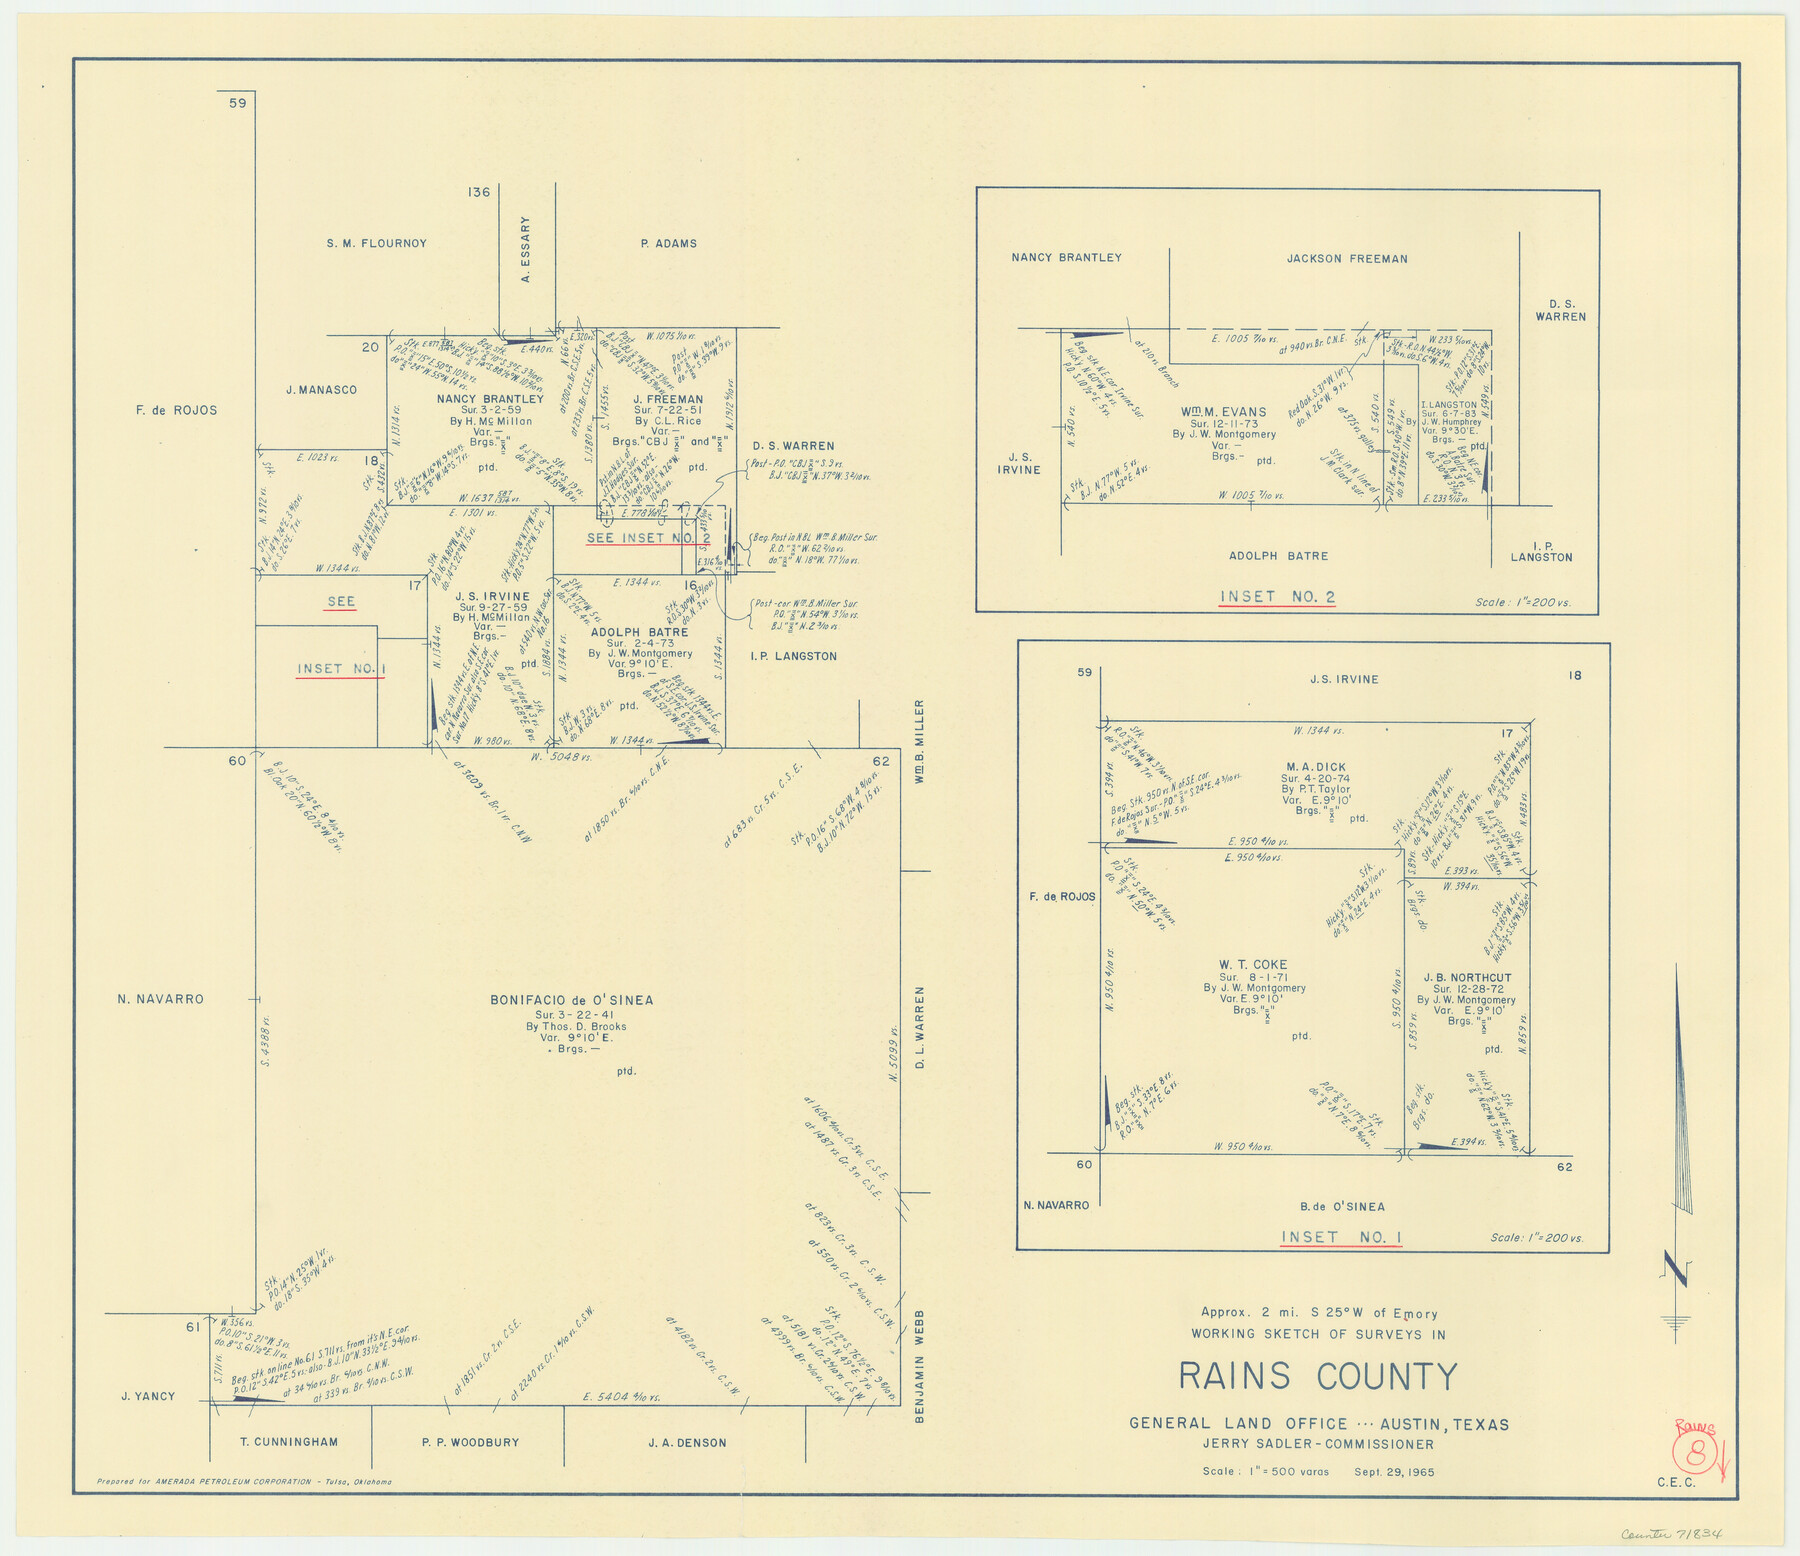 71834, Rains County Working Sketch 8, General Map Collection